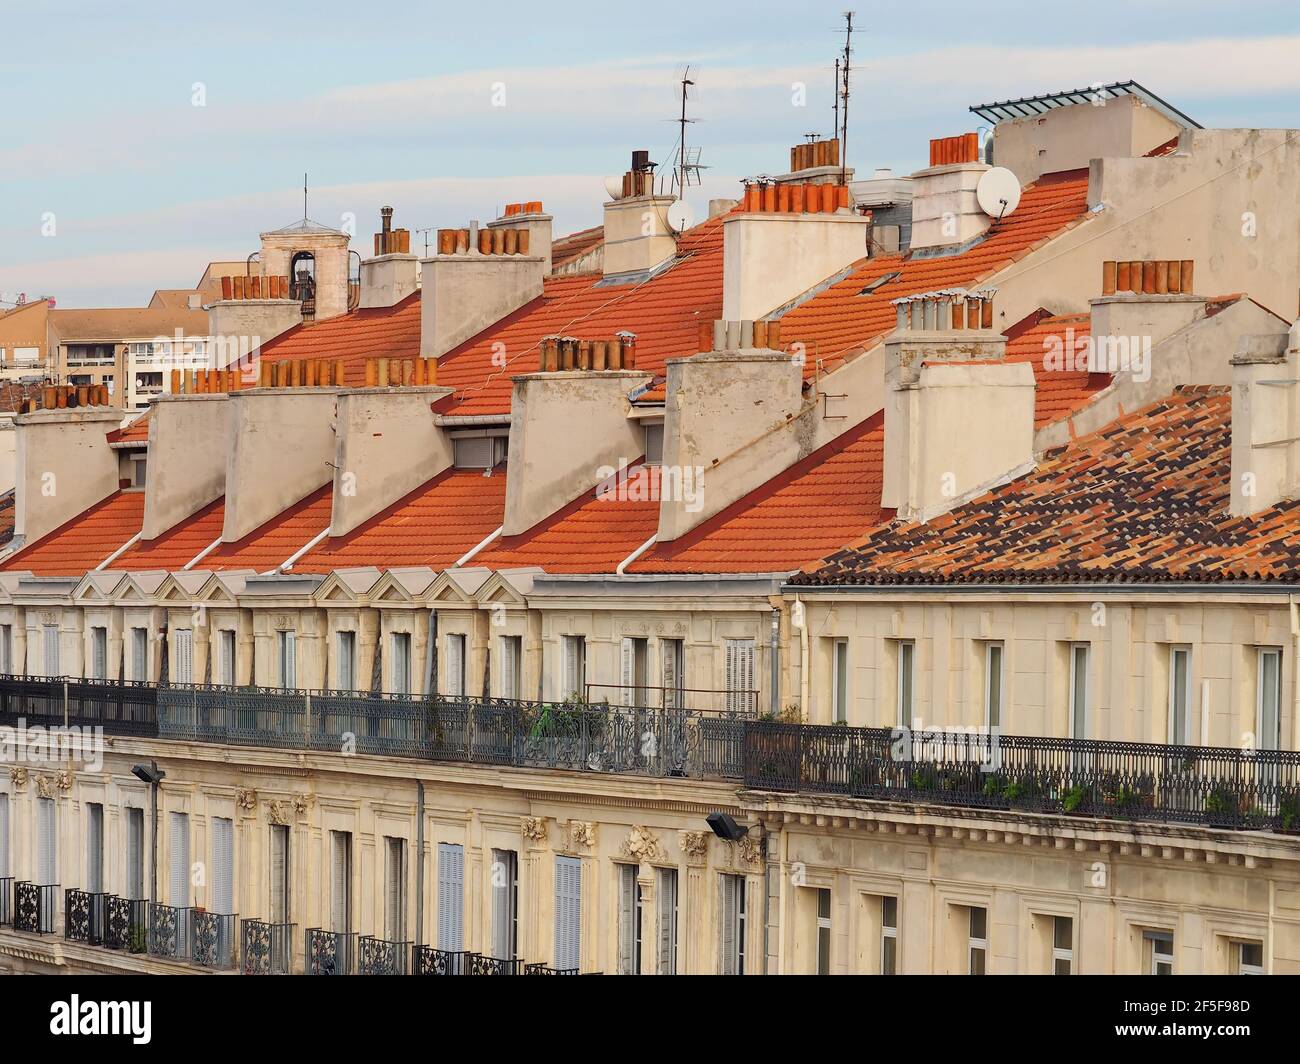 Panoramic view of the rooftops and chimneys of Marseille, France during sunset Stock Photo